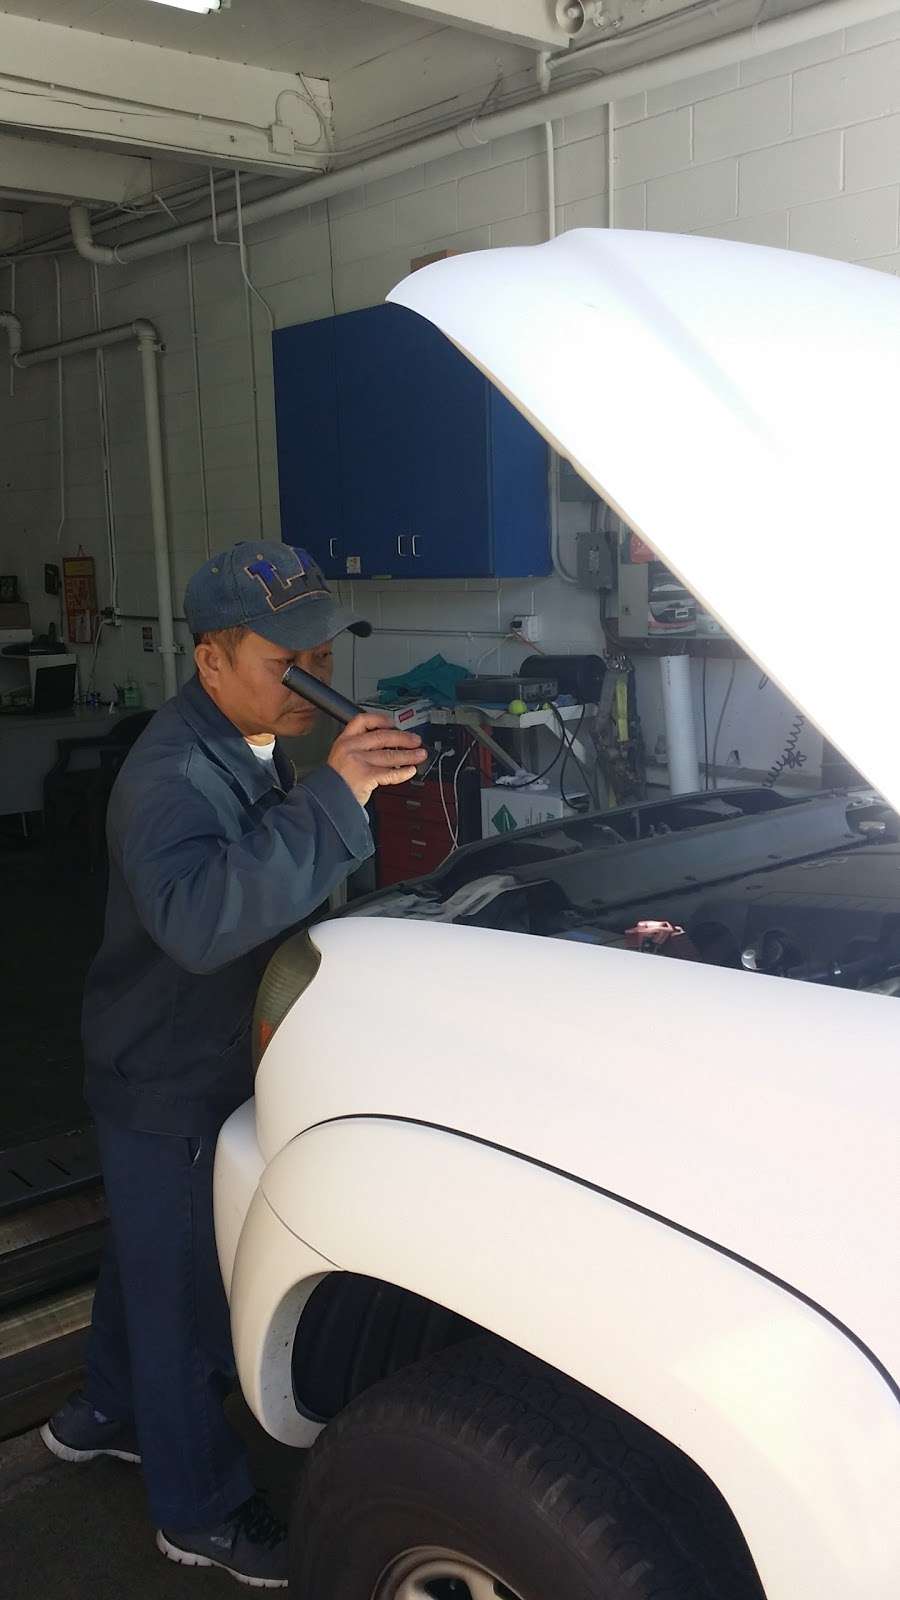 AA Smog Test Only | 30081 Crown Valley Pkwy #B, Laguna Niguel, CA 92677, USA | Phone: (949) 363-9300